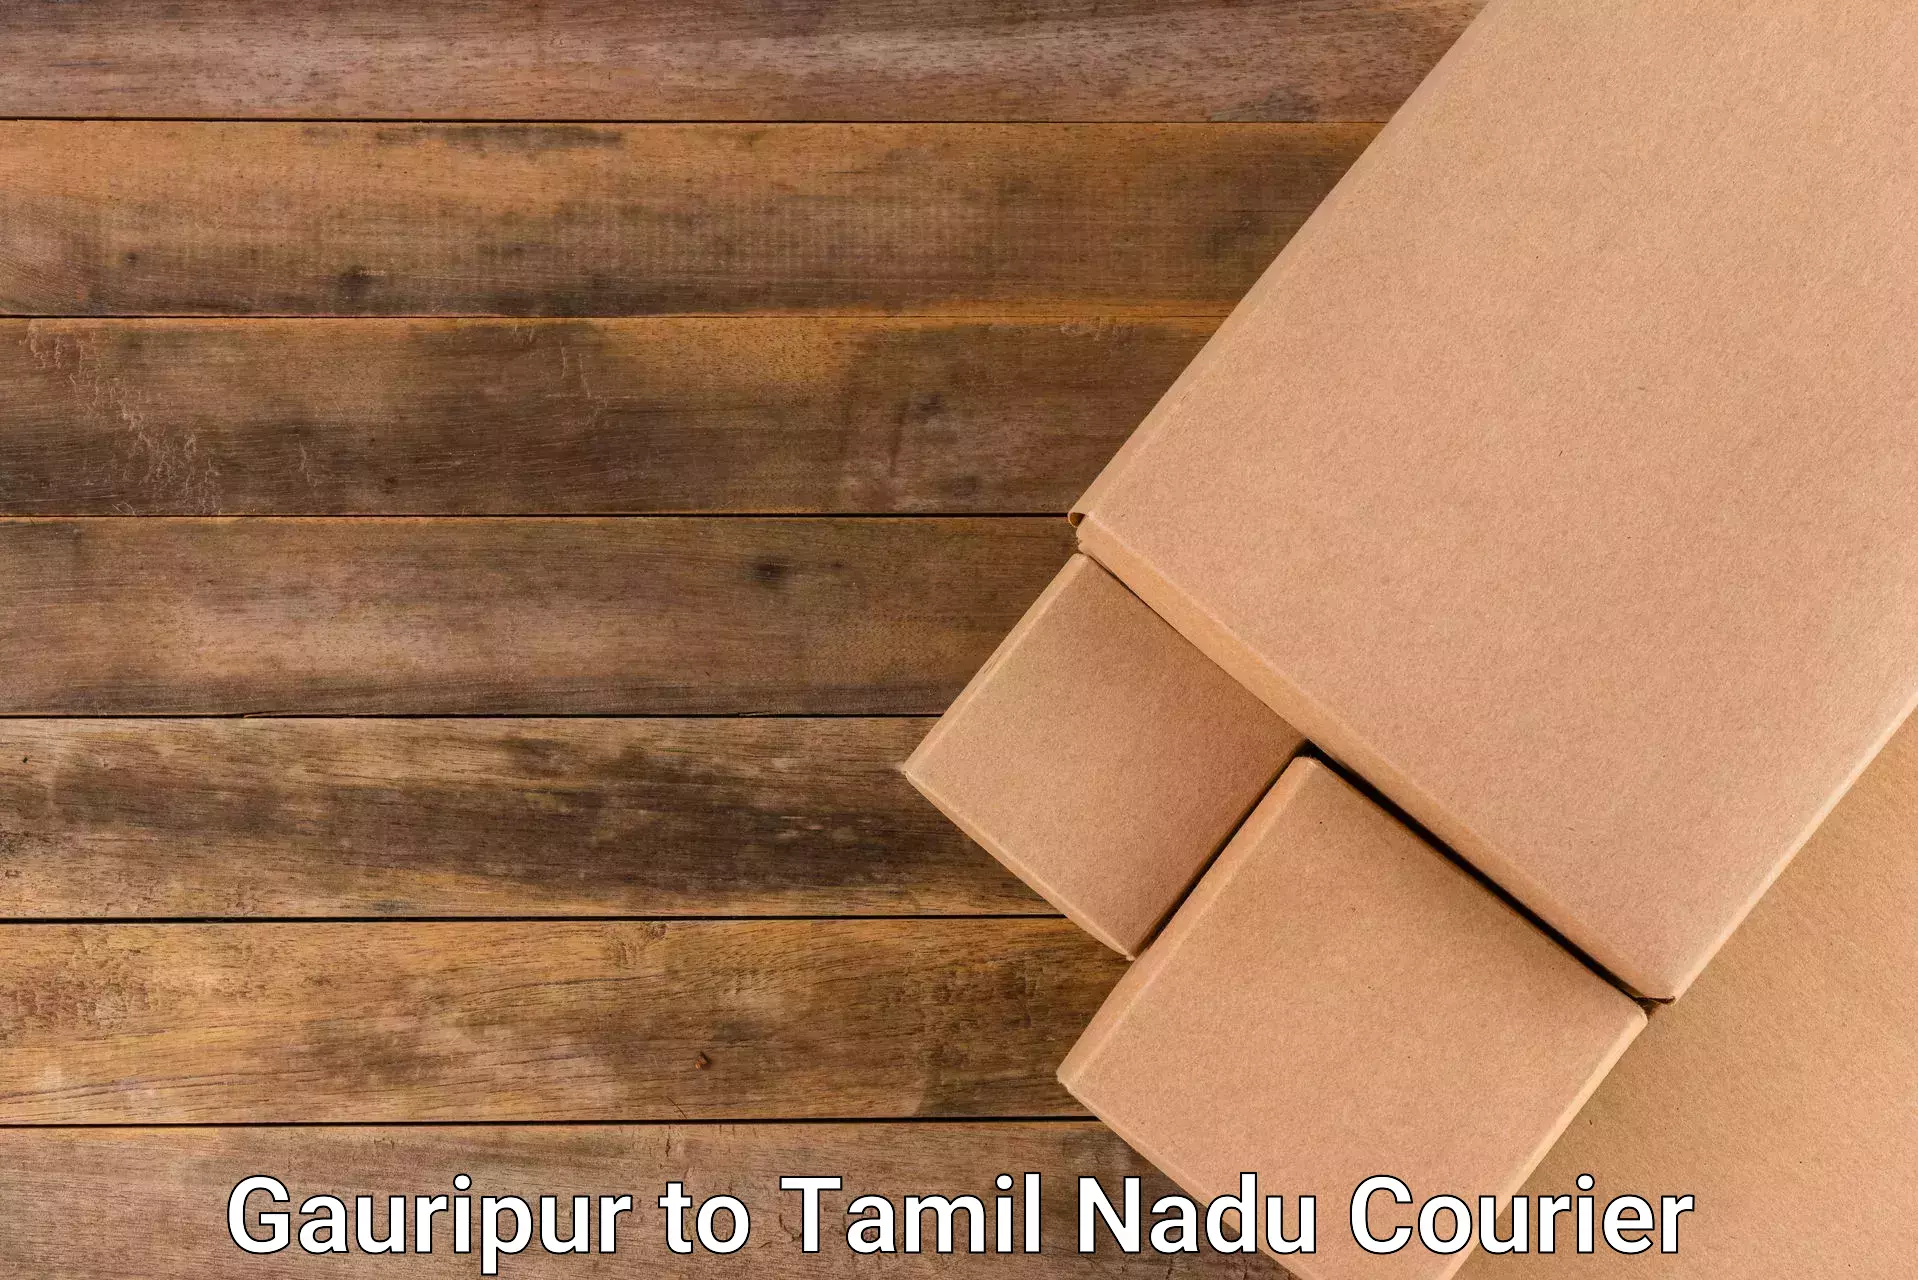 Cash on delivery service Gauripur to Tamil Nadu